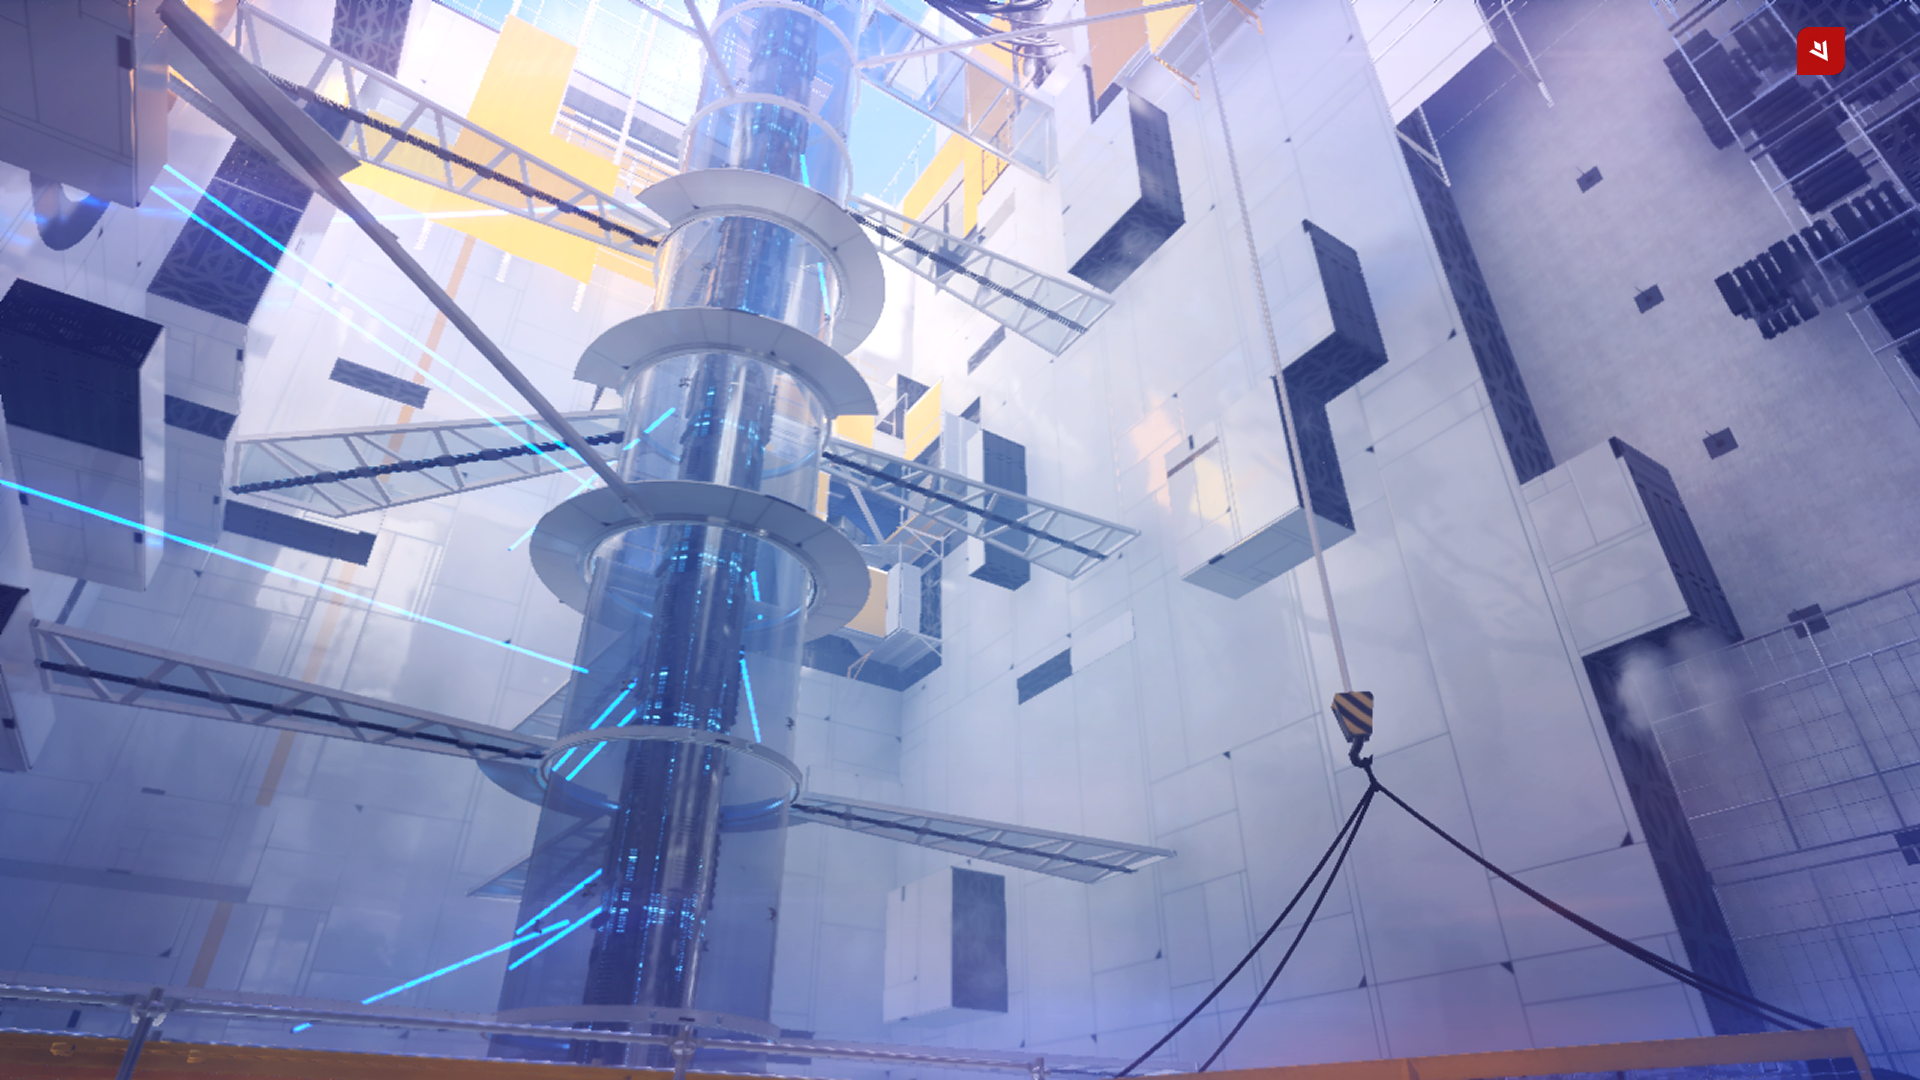 Mirror's Edge Catalyst is the parkour game we always wanted